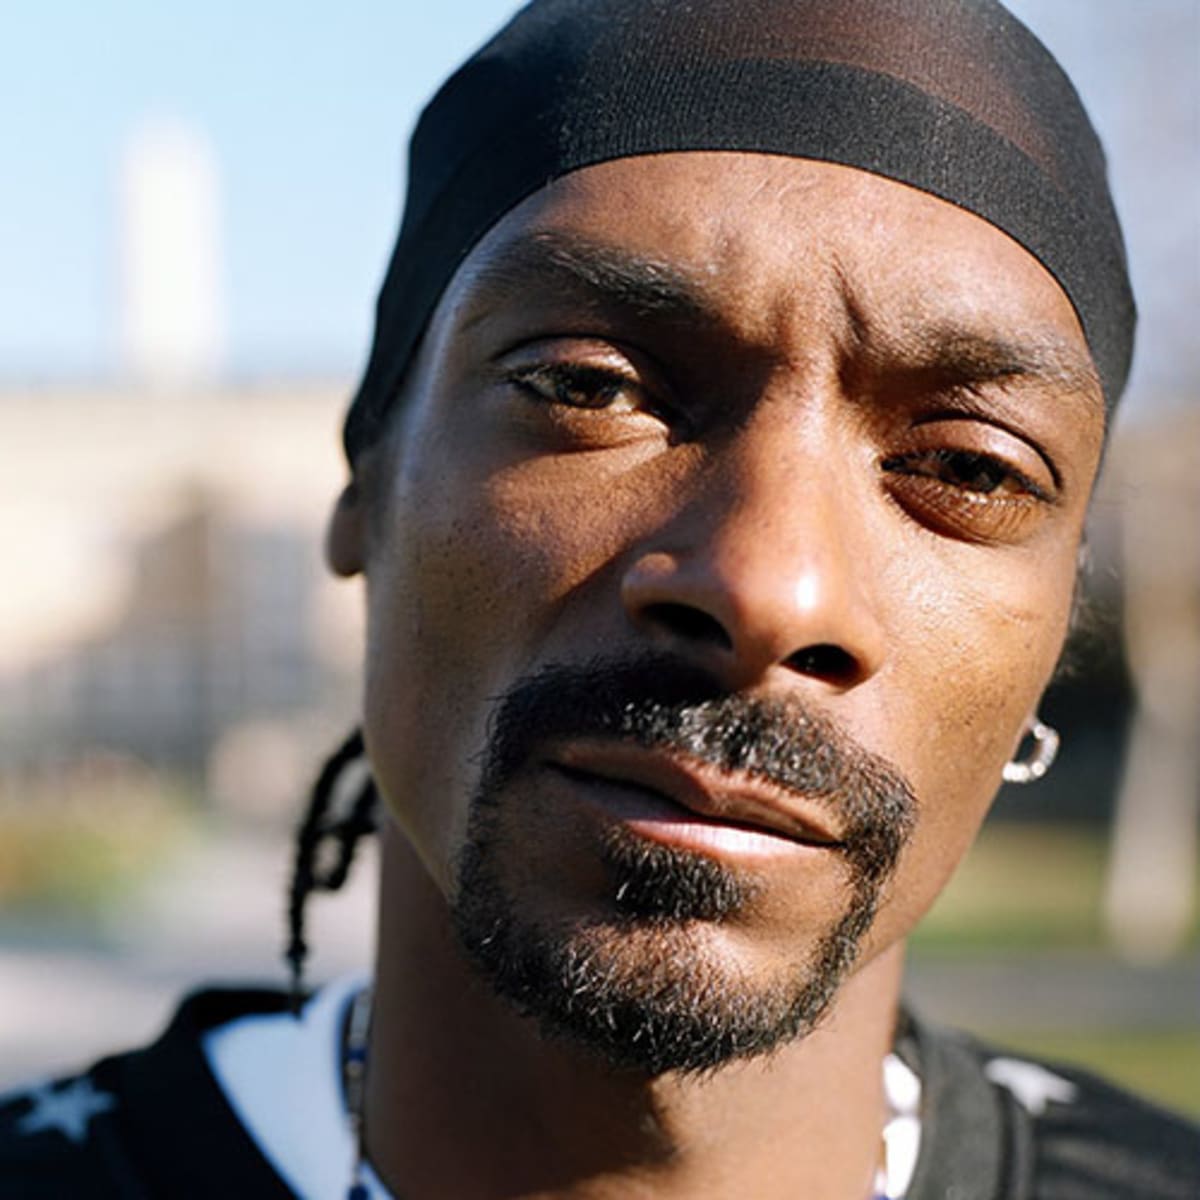 Snoop Dogg (SNUP)